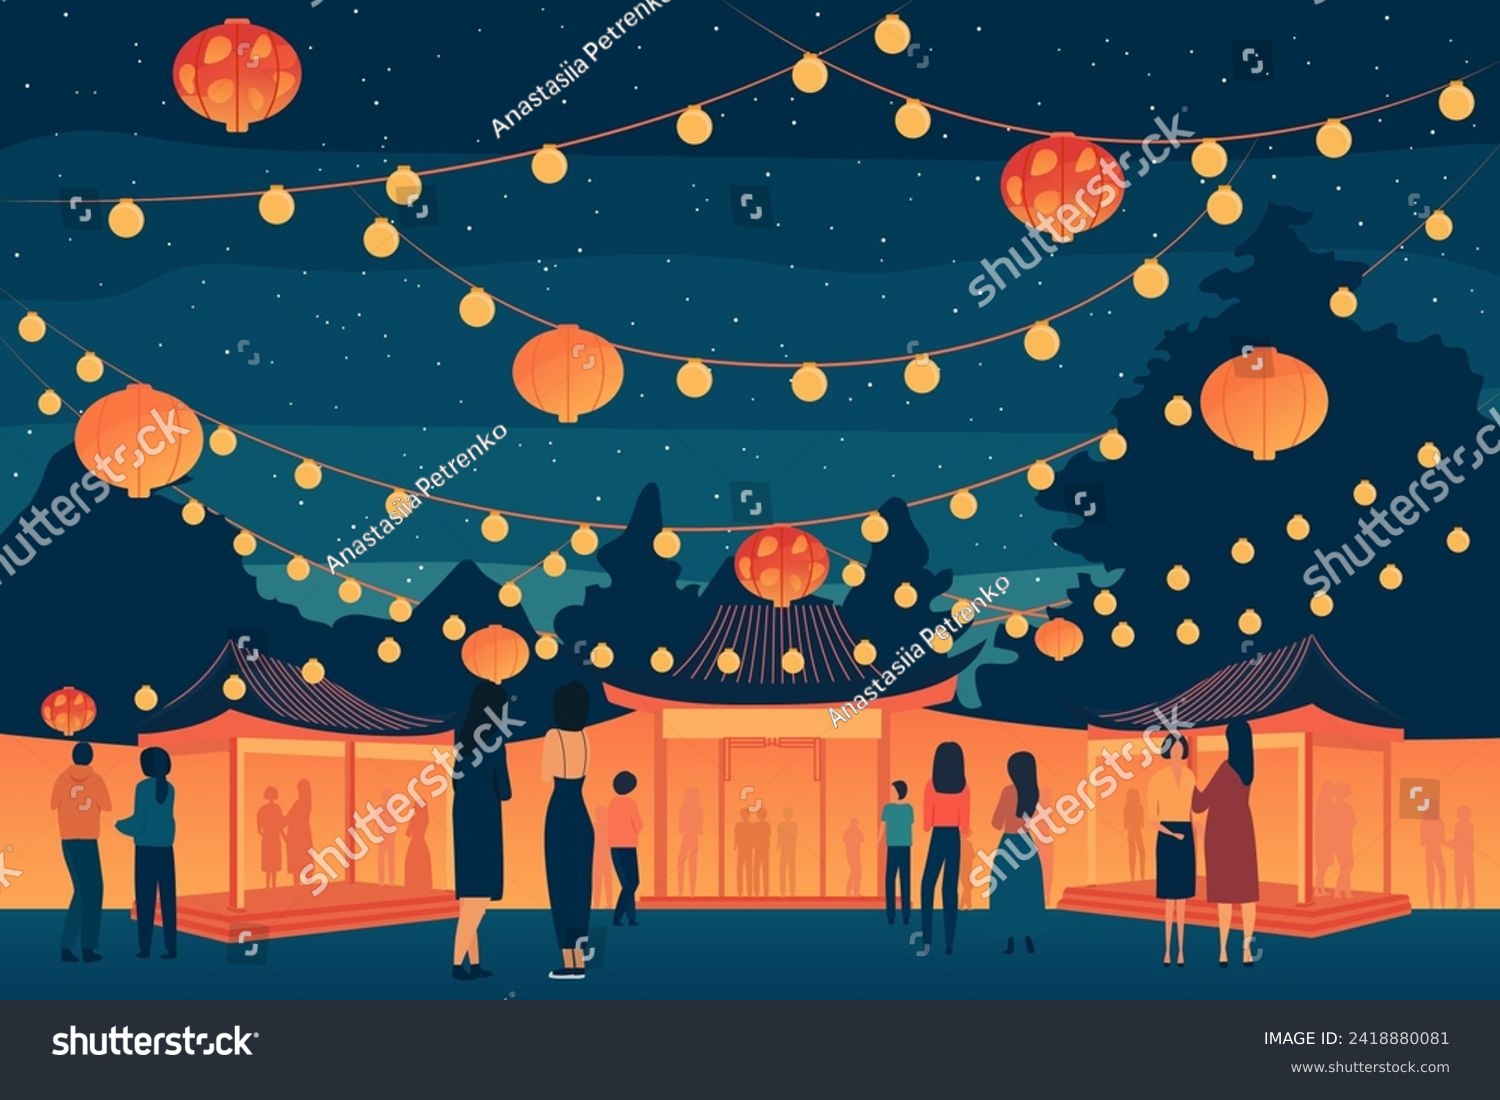 illustration for lantern festival, people having fun and celebrating, lots of lanterns and bright bulbs around, festival, celebration #2418880081